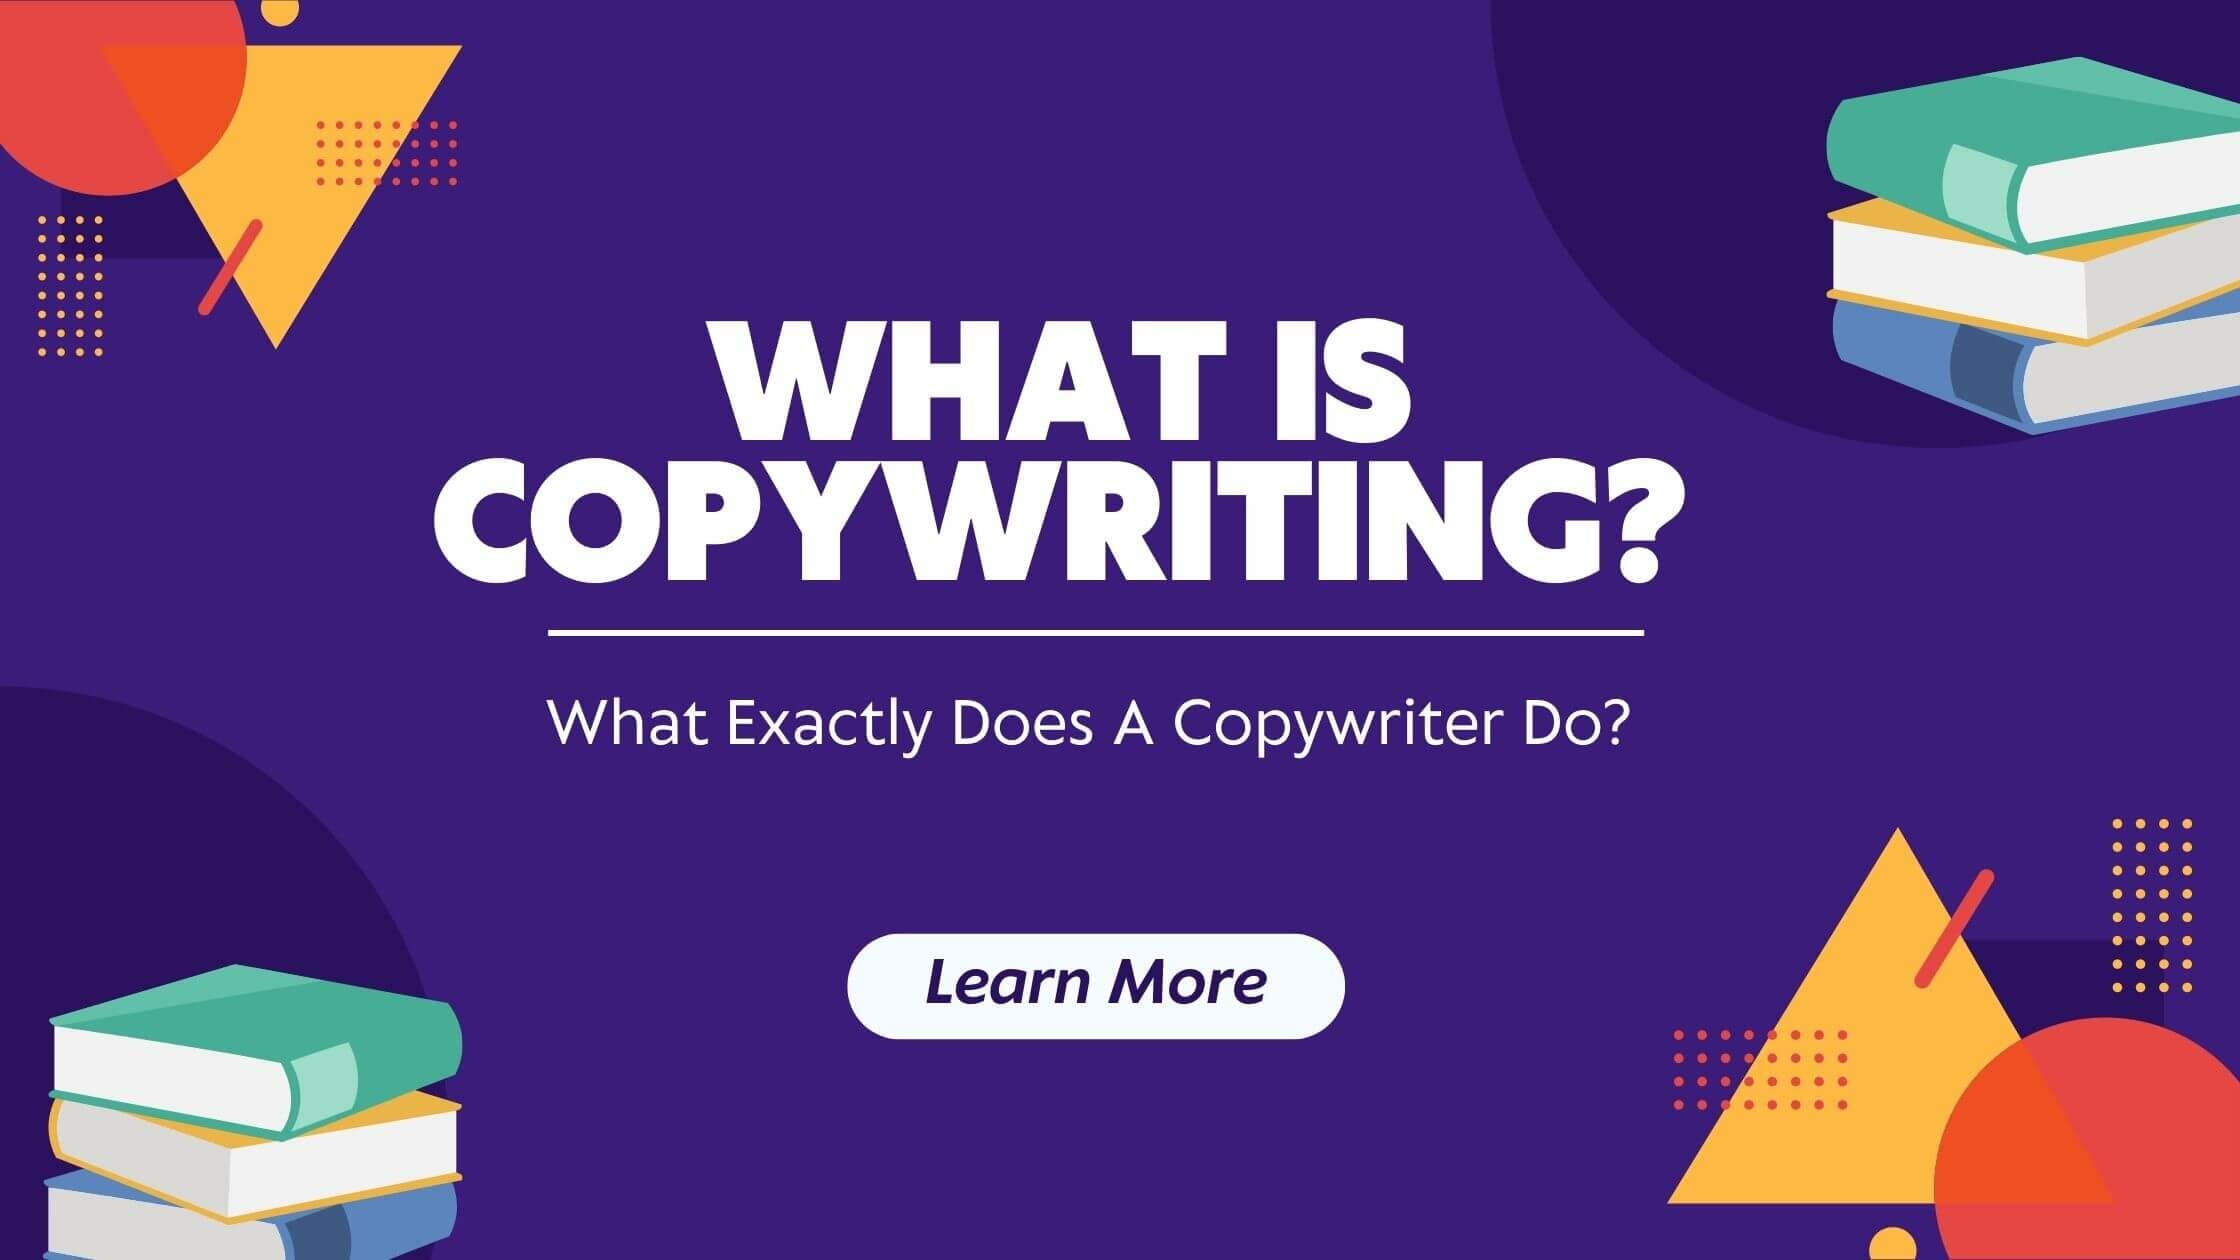 What Is Copywriting and What Exactly Does a Copywriter Do?